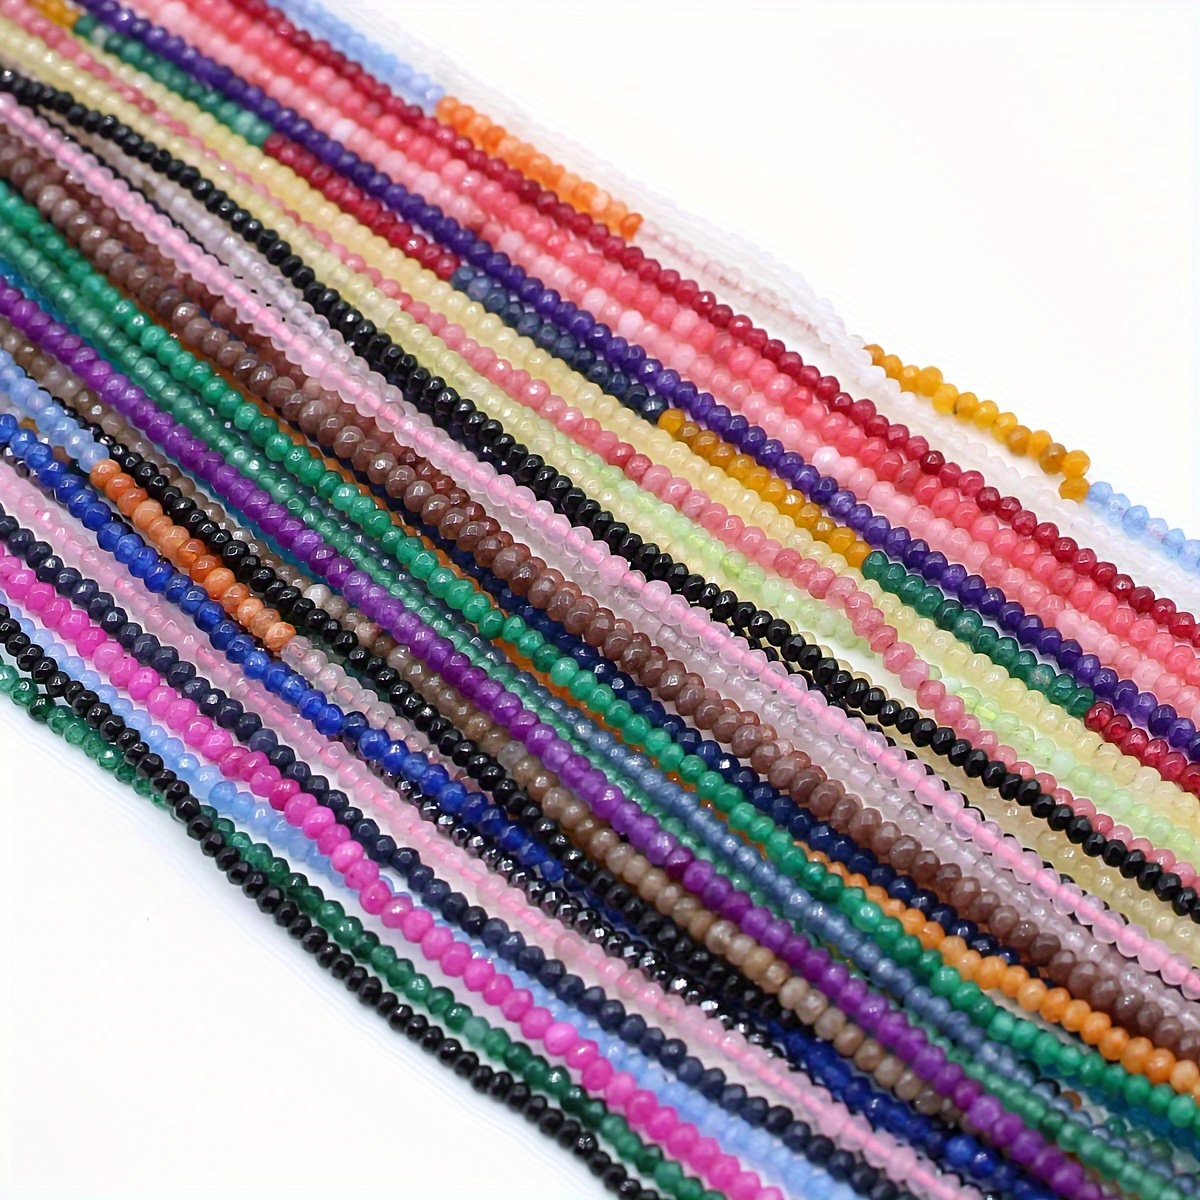 

10 Strand Random Colour Faceted Small Beads Natural Semi-precious Stone Loose Spacer Beads For Jewelry Making Diy Necklace Bracelets Earring Accessories